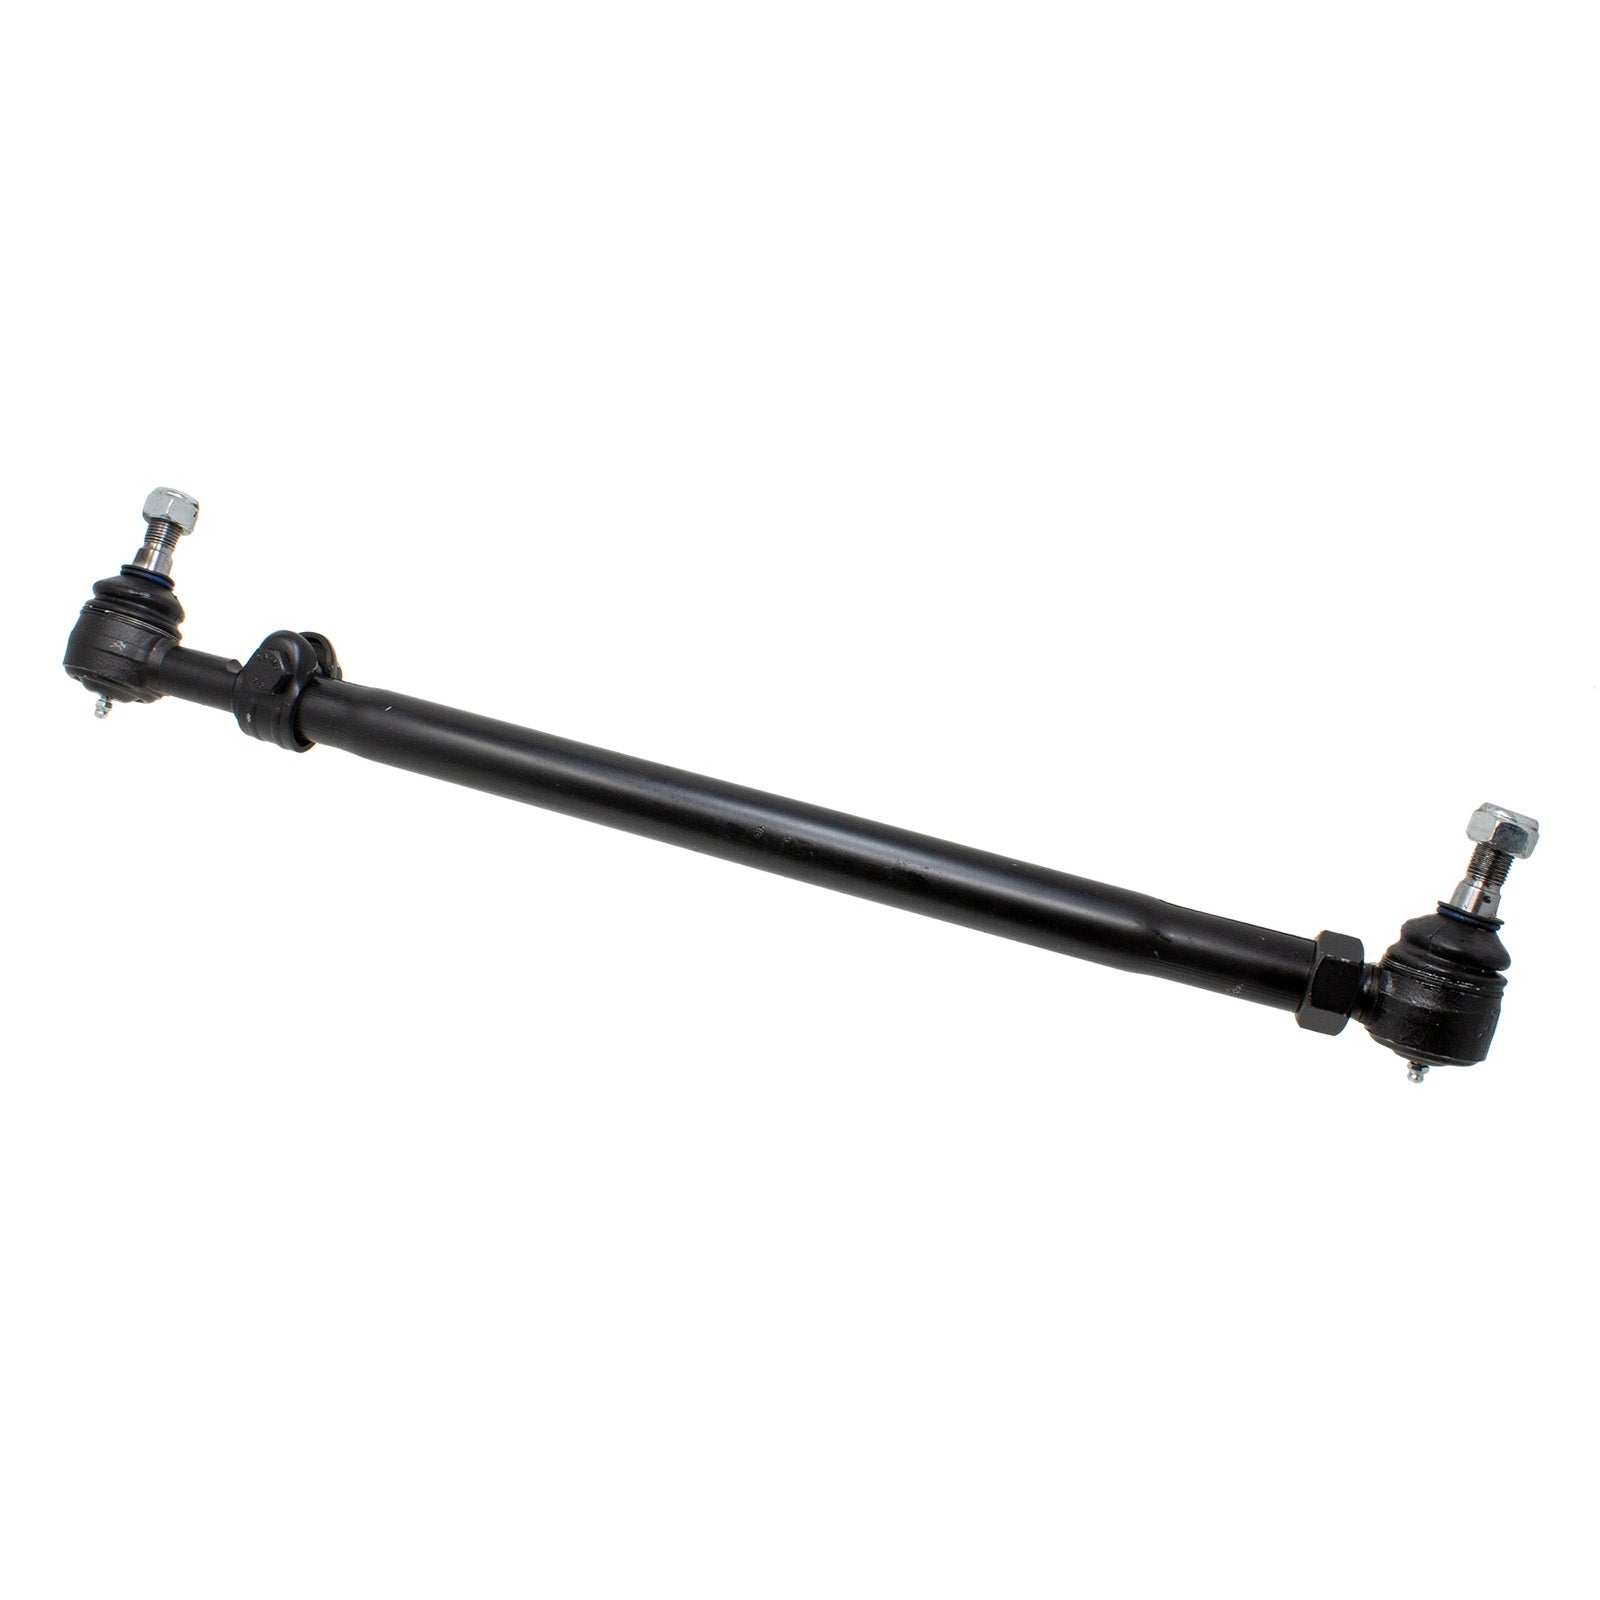 Duraforce 164210AS, Tie Rod Assembly For Oliver